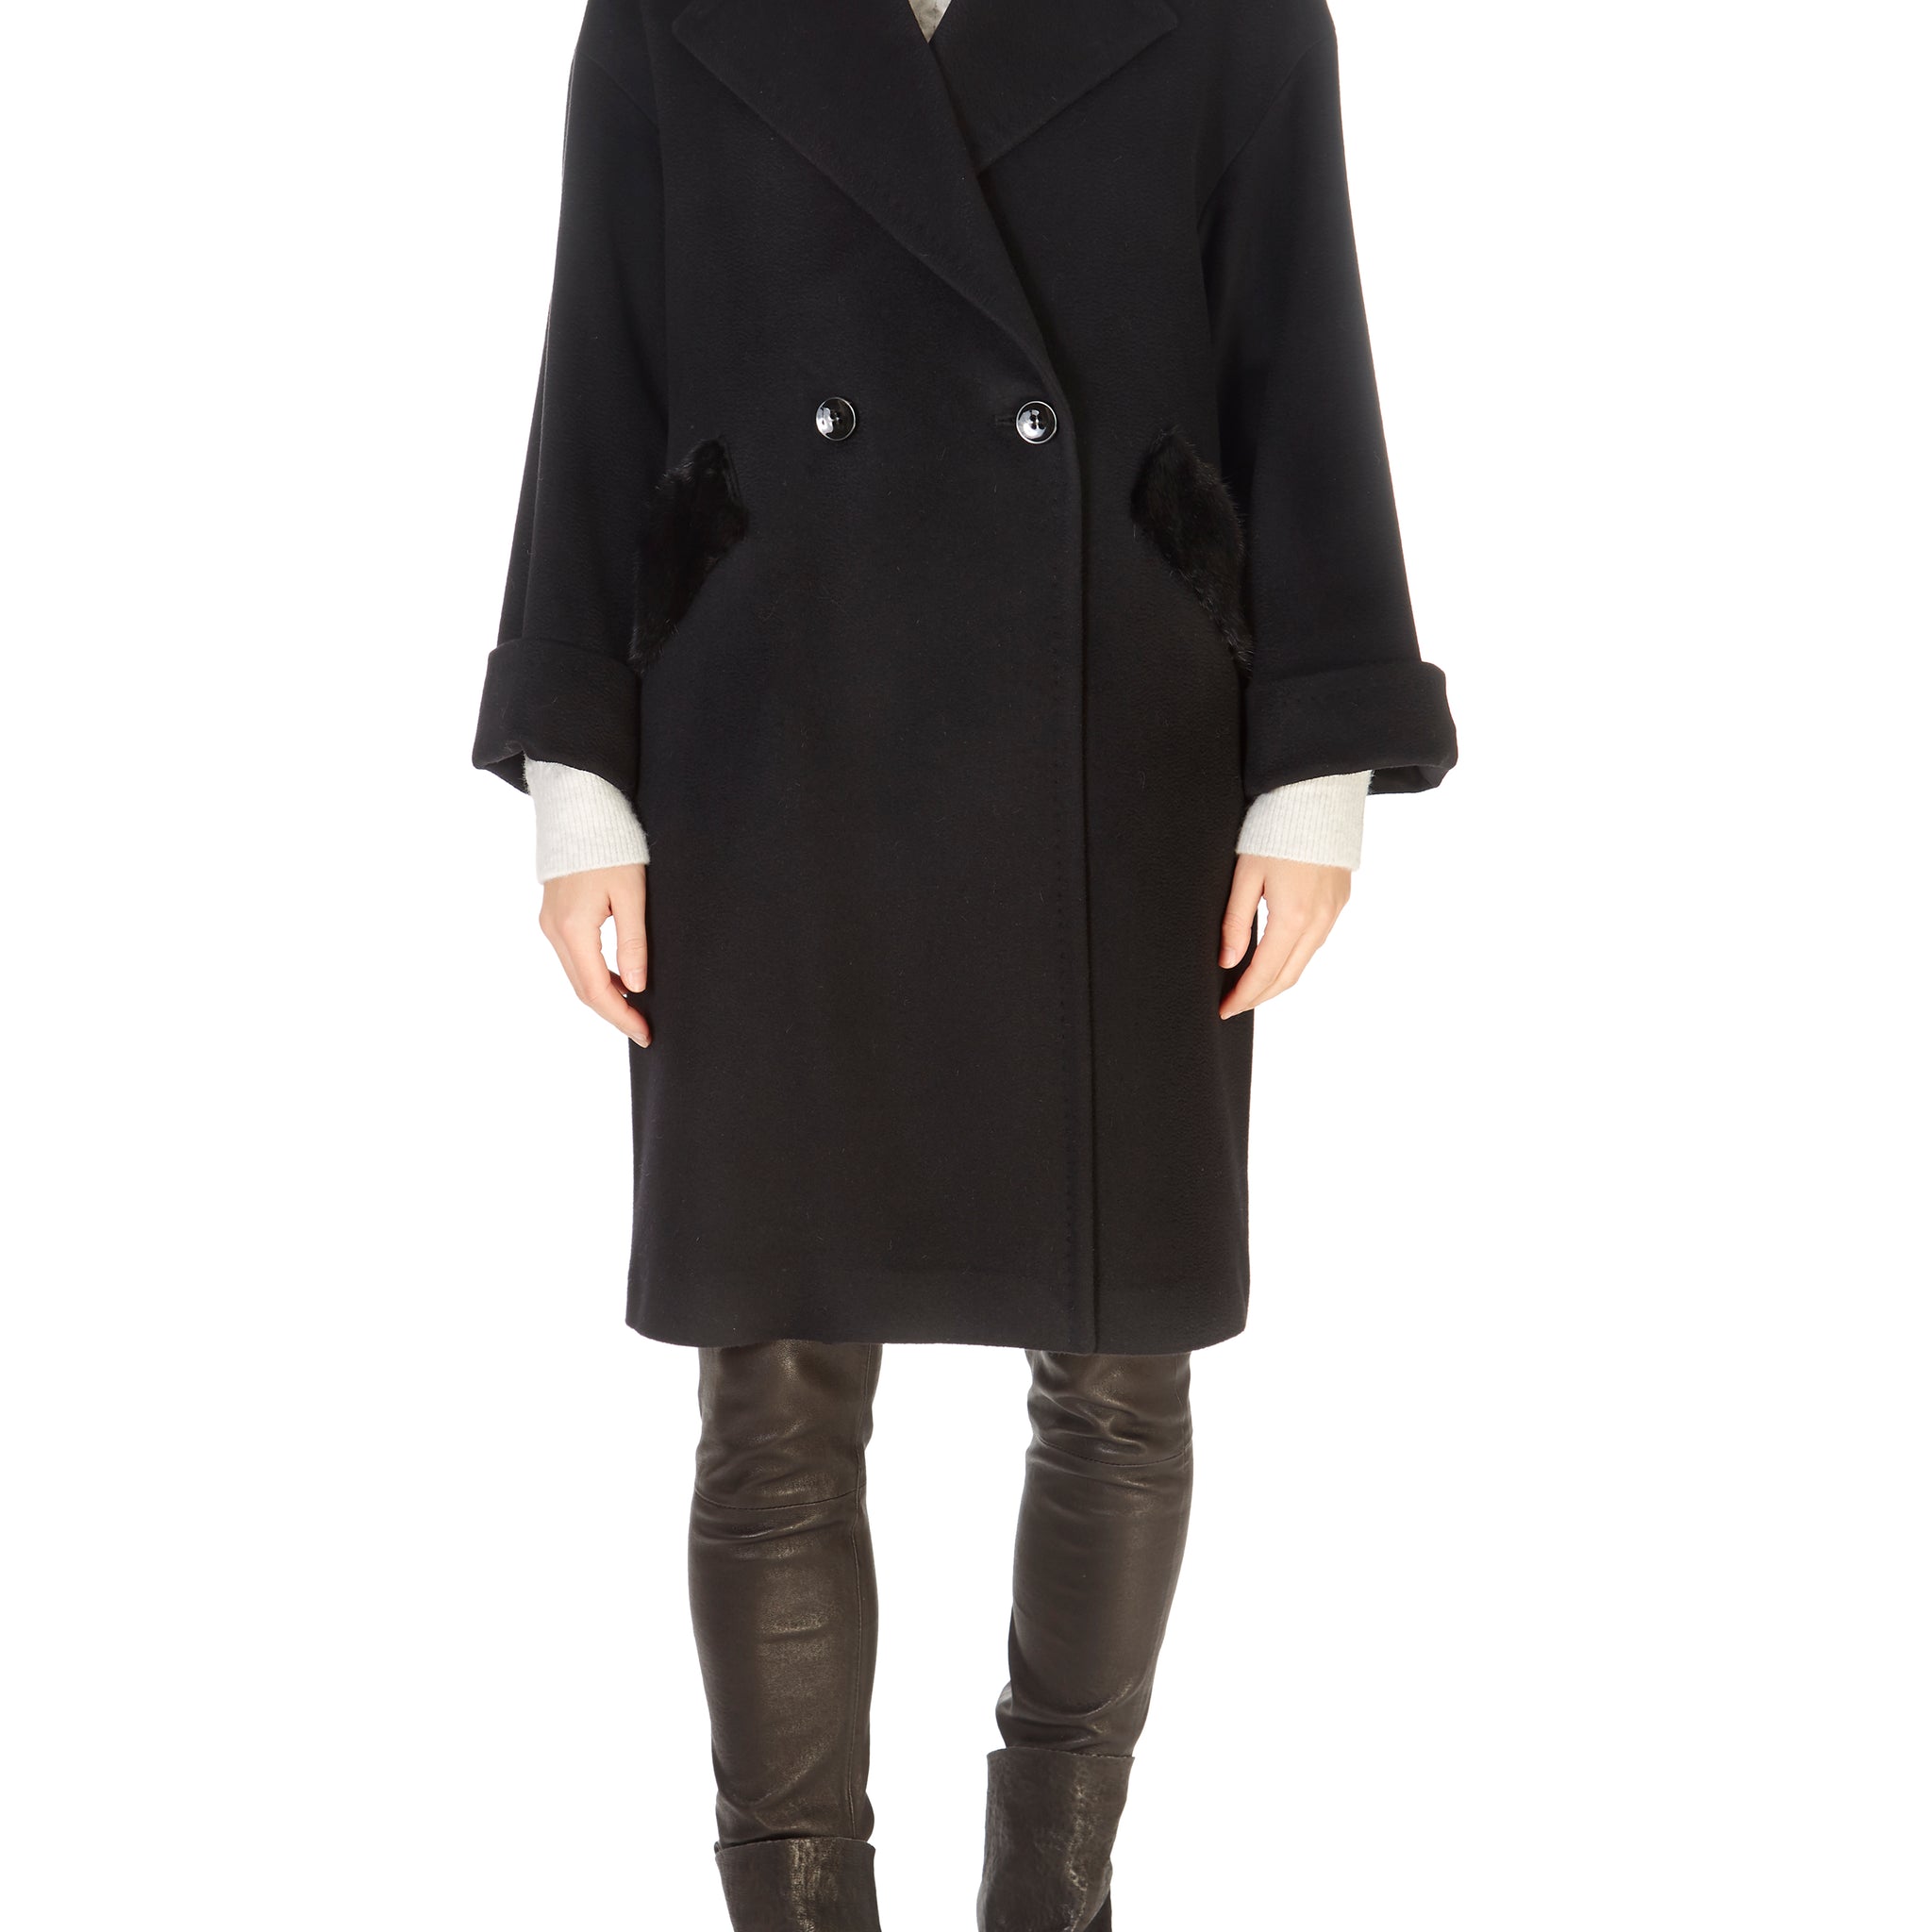 Black Wool Double Breasted Coat With Mink Trim - Jessimara